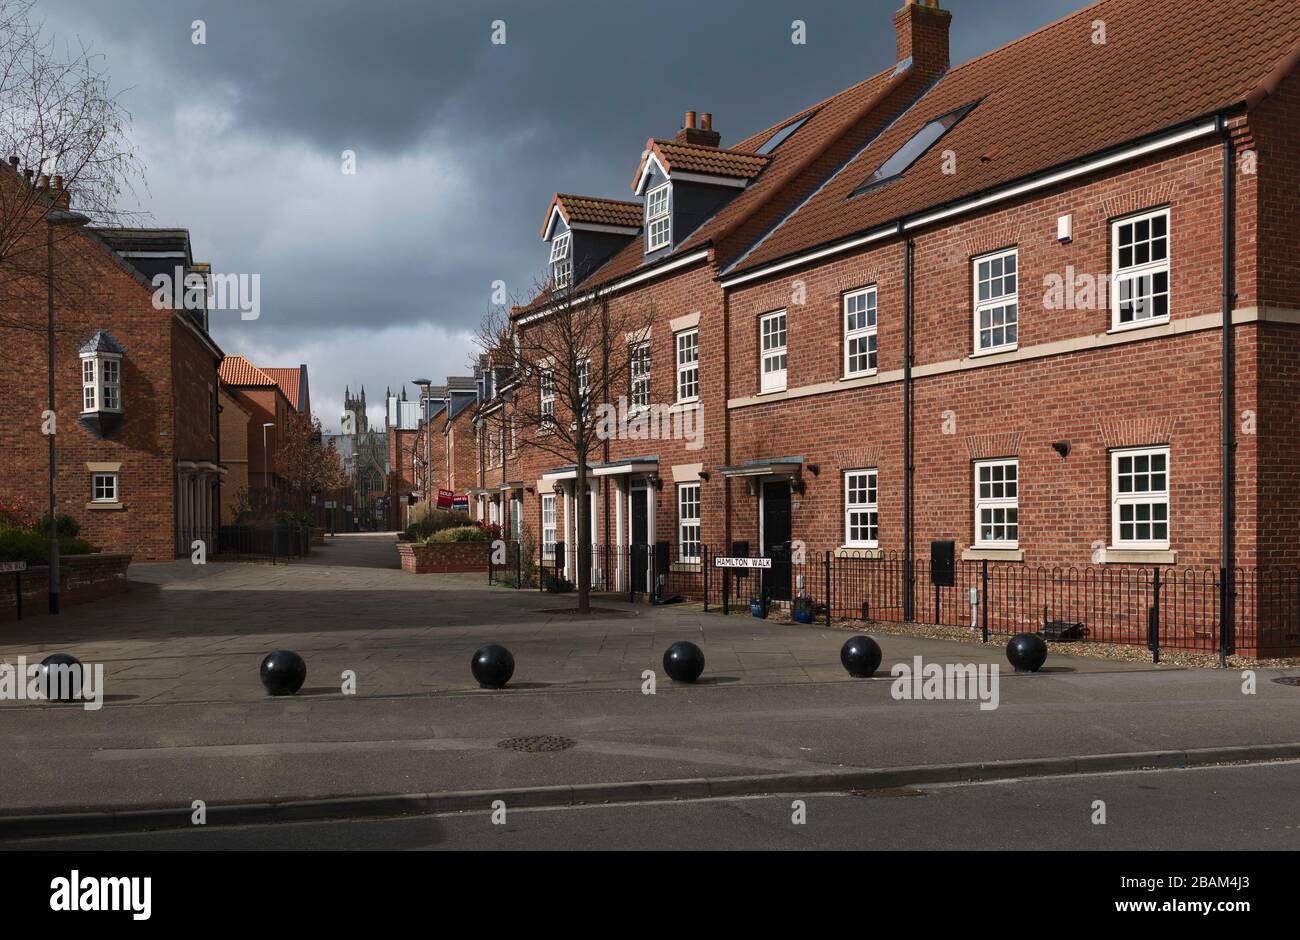 Shopping precinct and town houses completely devoid of people due to outbreak of Corona virus and government restrictions. Beverley, UK. Stock Photo